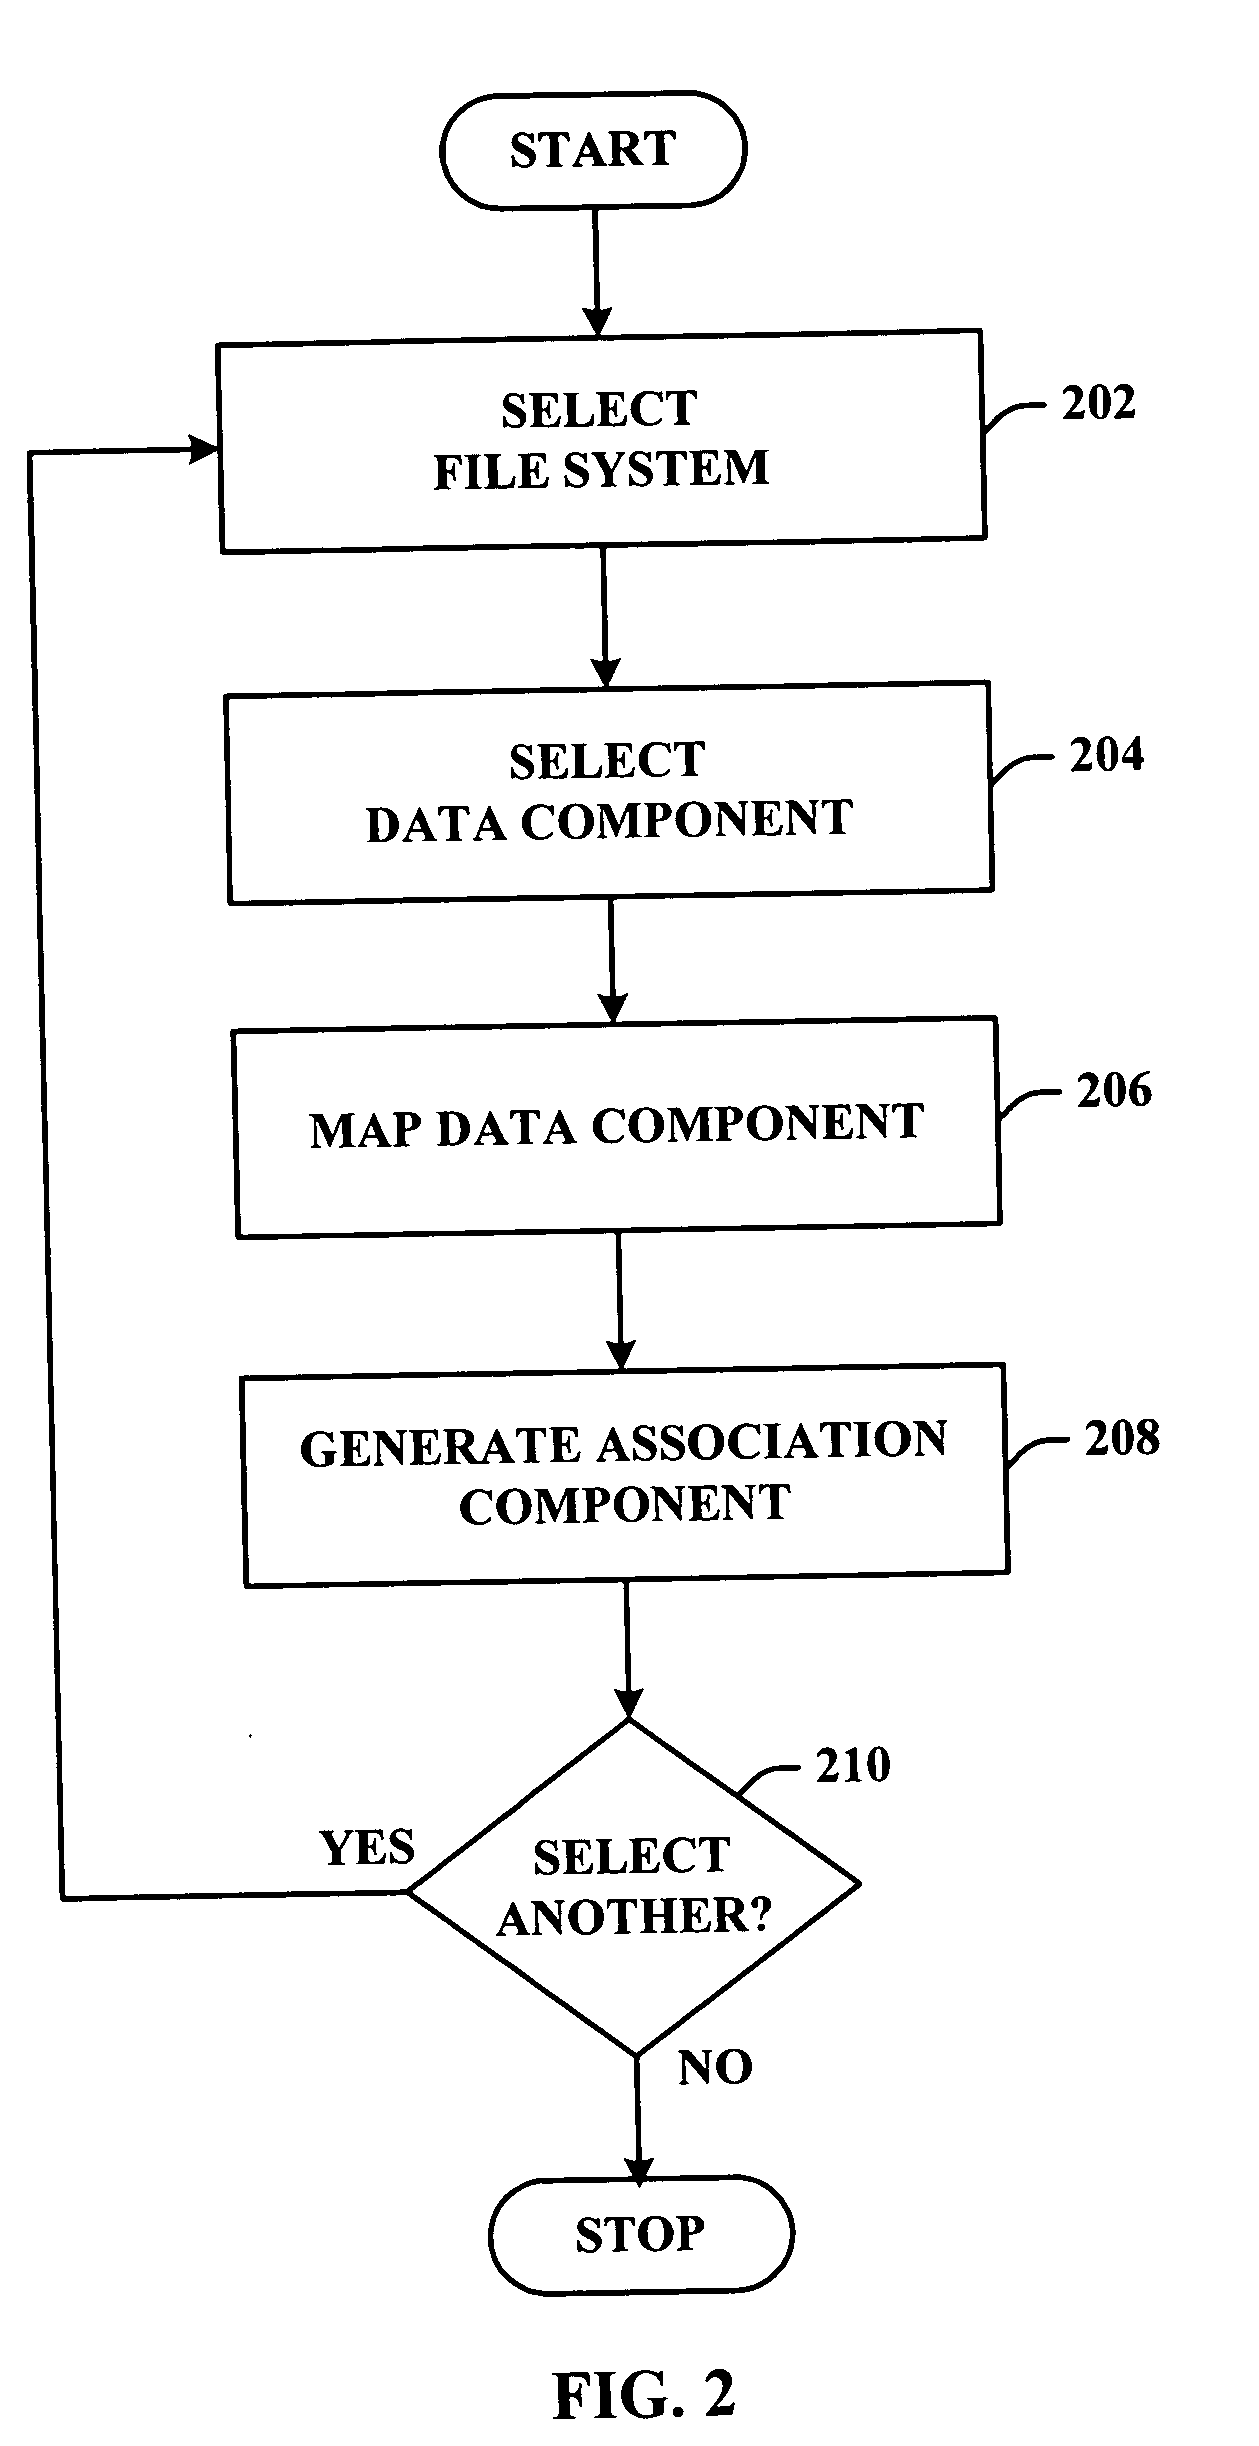 Interaction of static and dynamic data sets